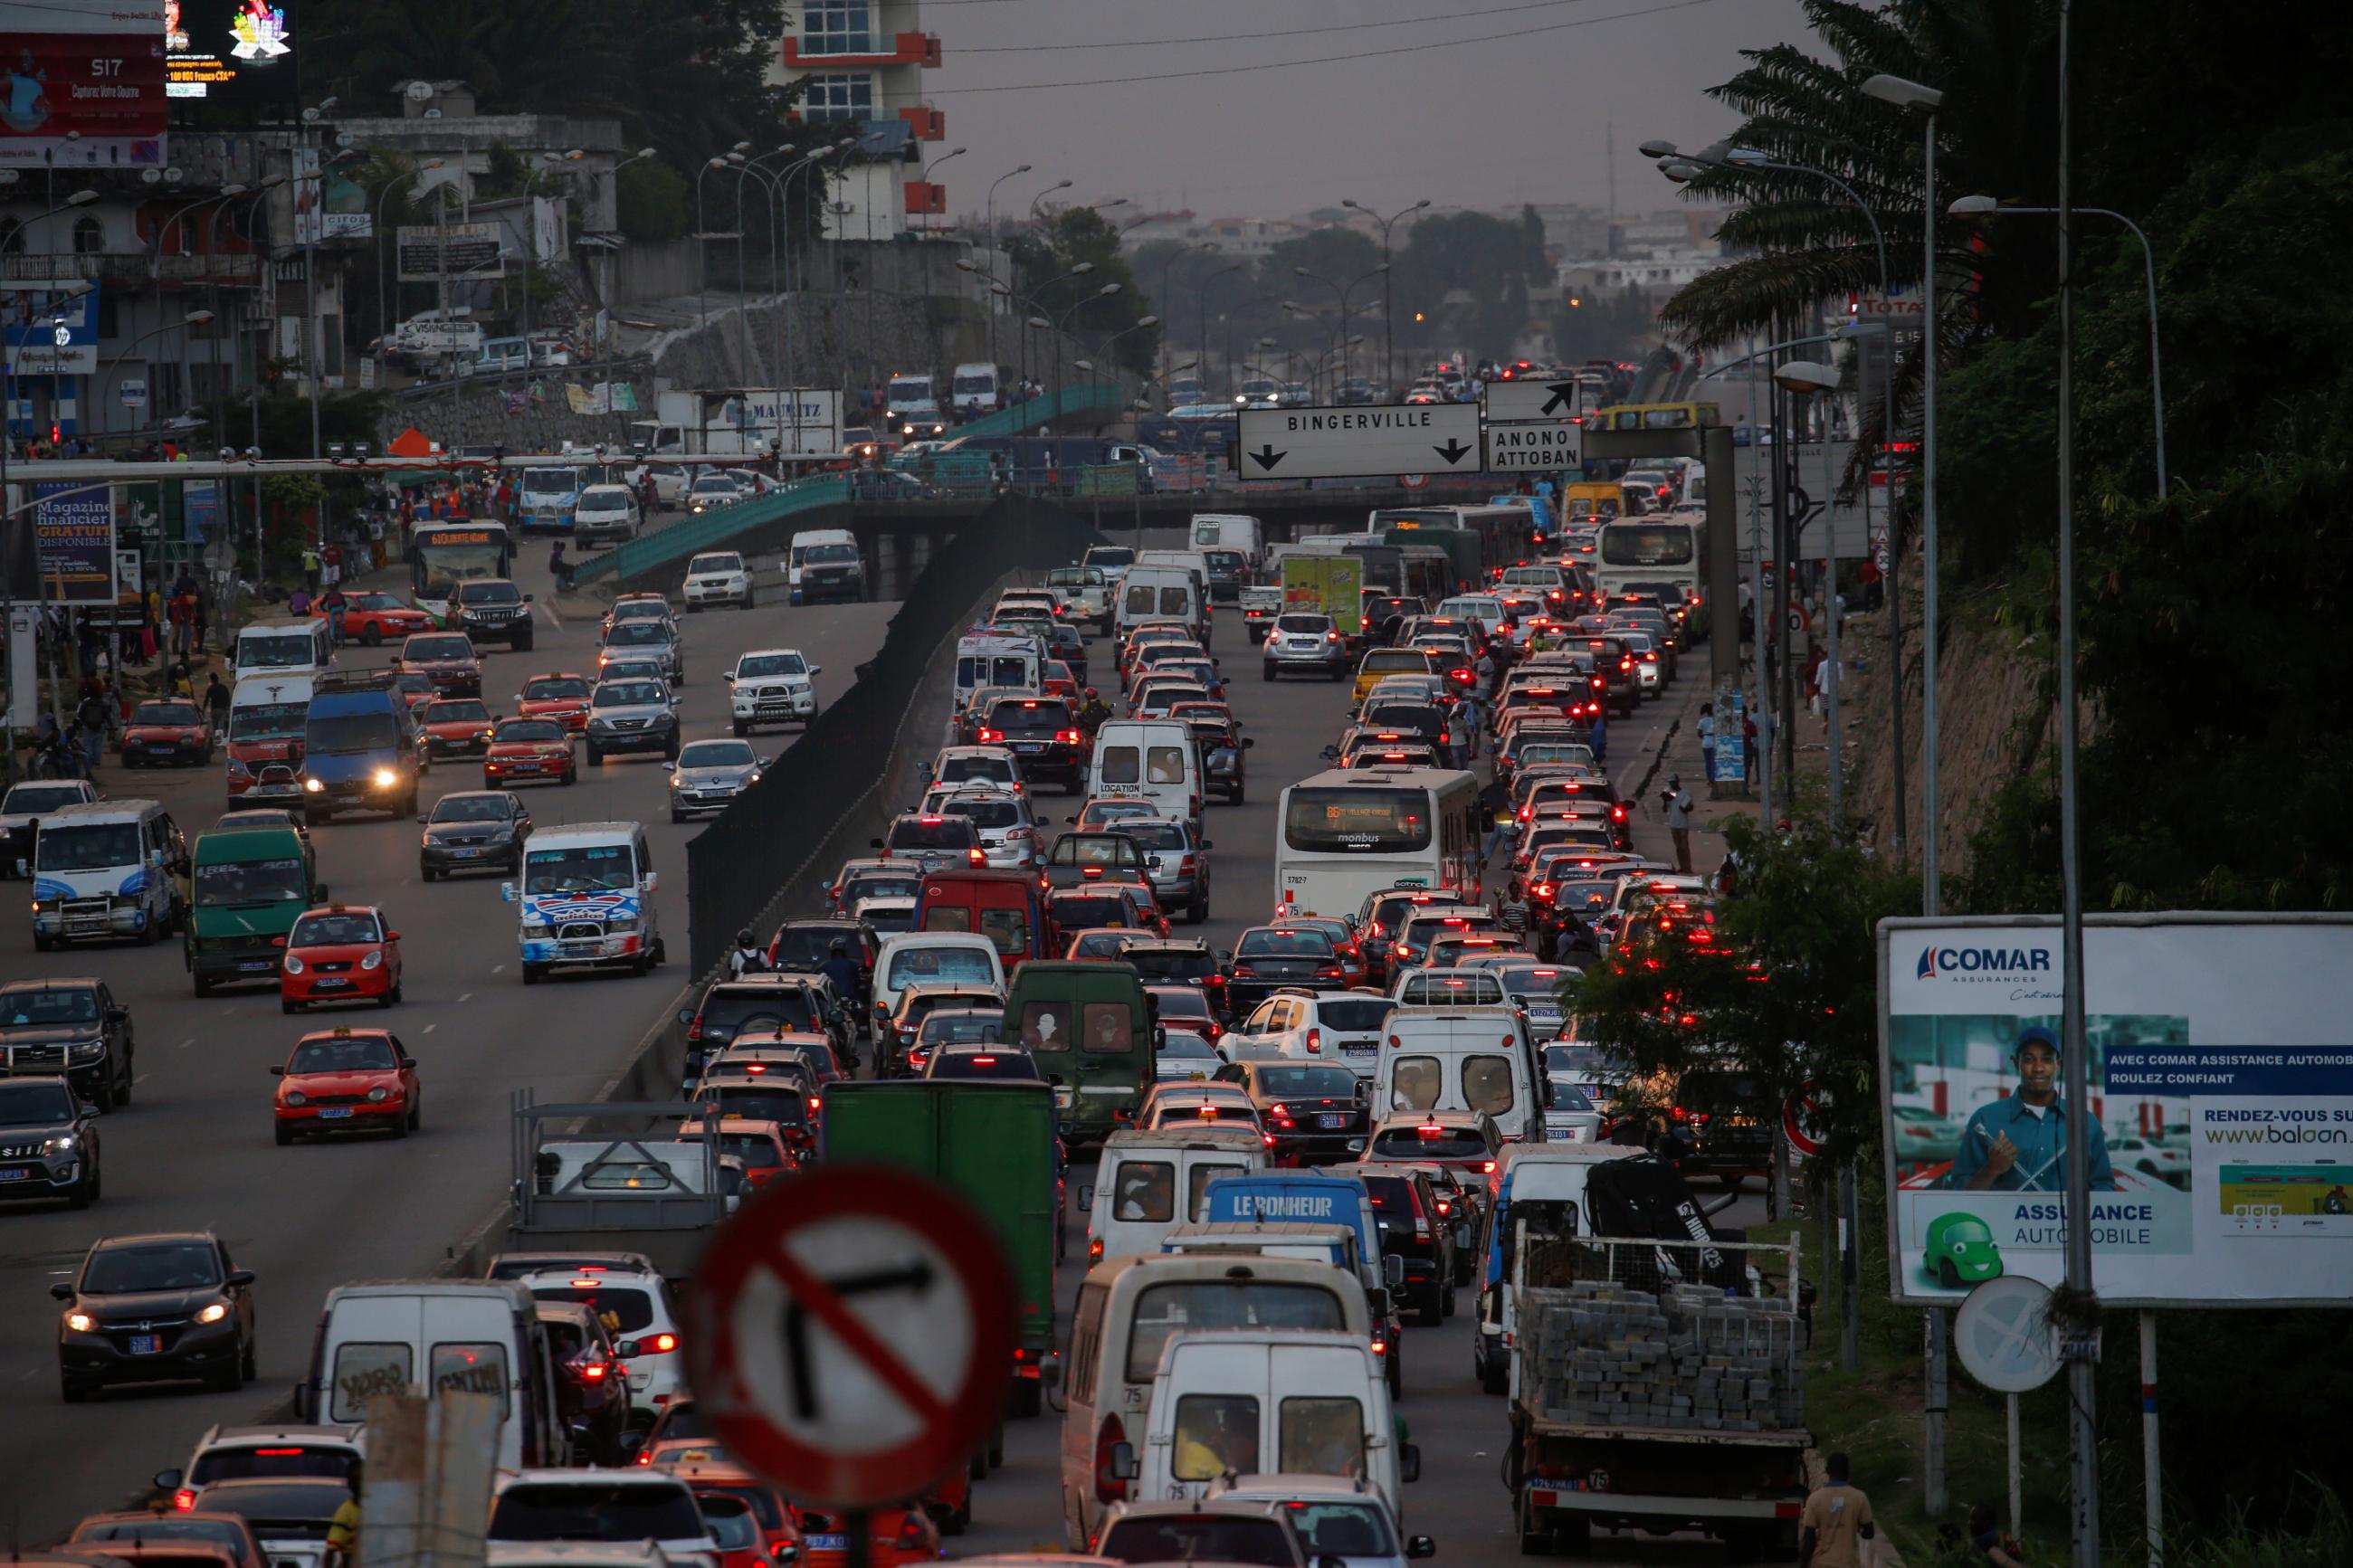 Vehicles are stuck in a traffic jam at dusk.